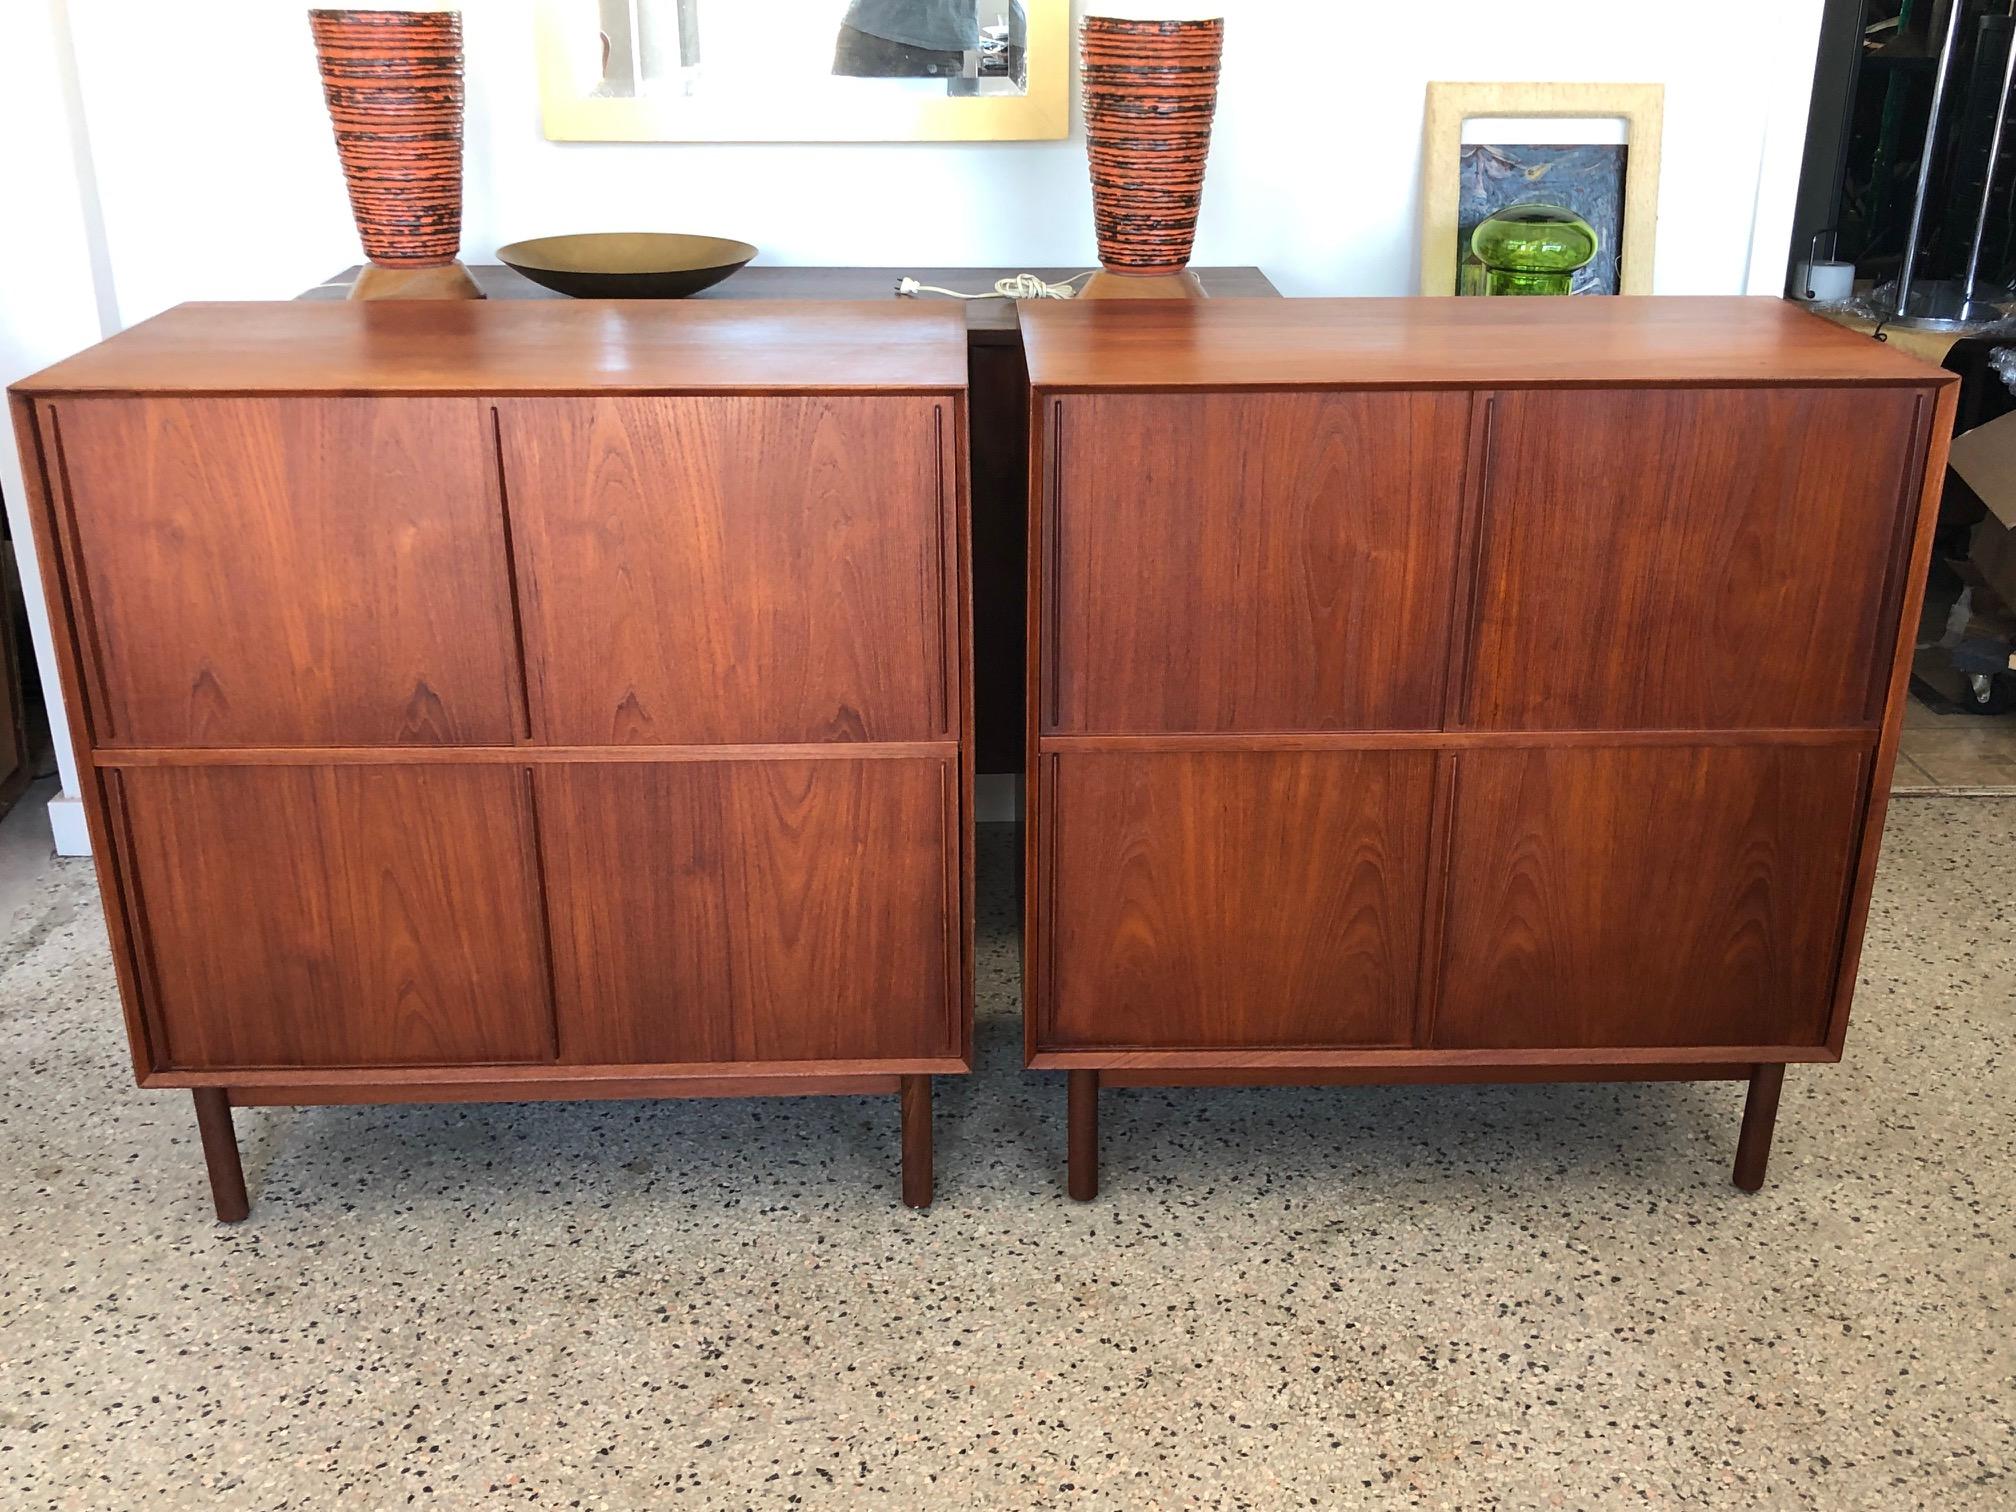 A great pair of solid teak cabinets with sliding doors and adjustable shelves inside. Finger- jointed case on round legs. Designed by Hvidt and Mølgaard for Søborg Møbler in 1958. Made in Denmark. Very good original condition. Teak has beautiful